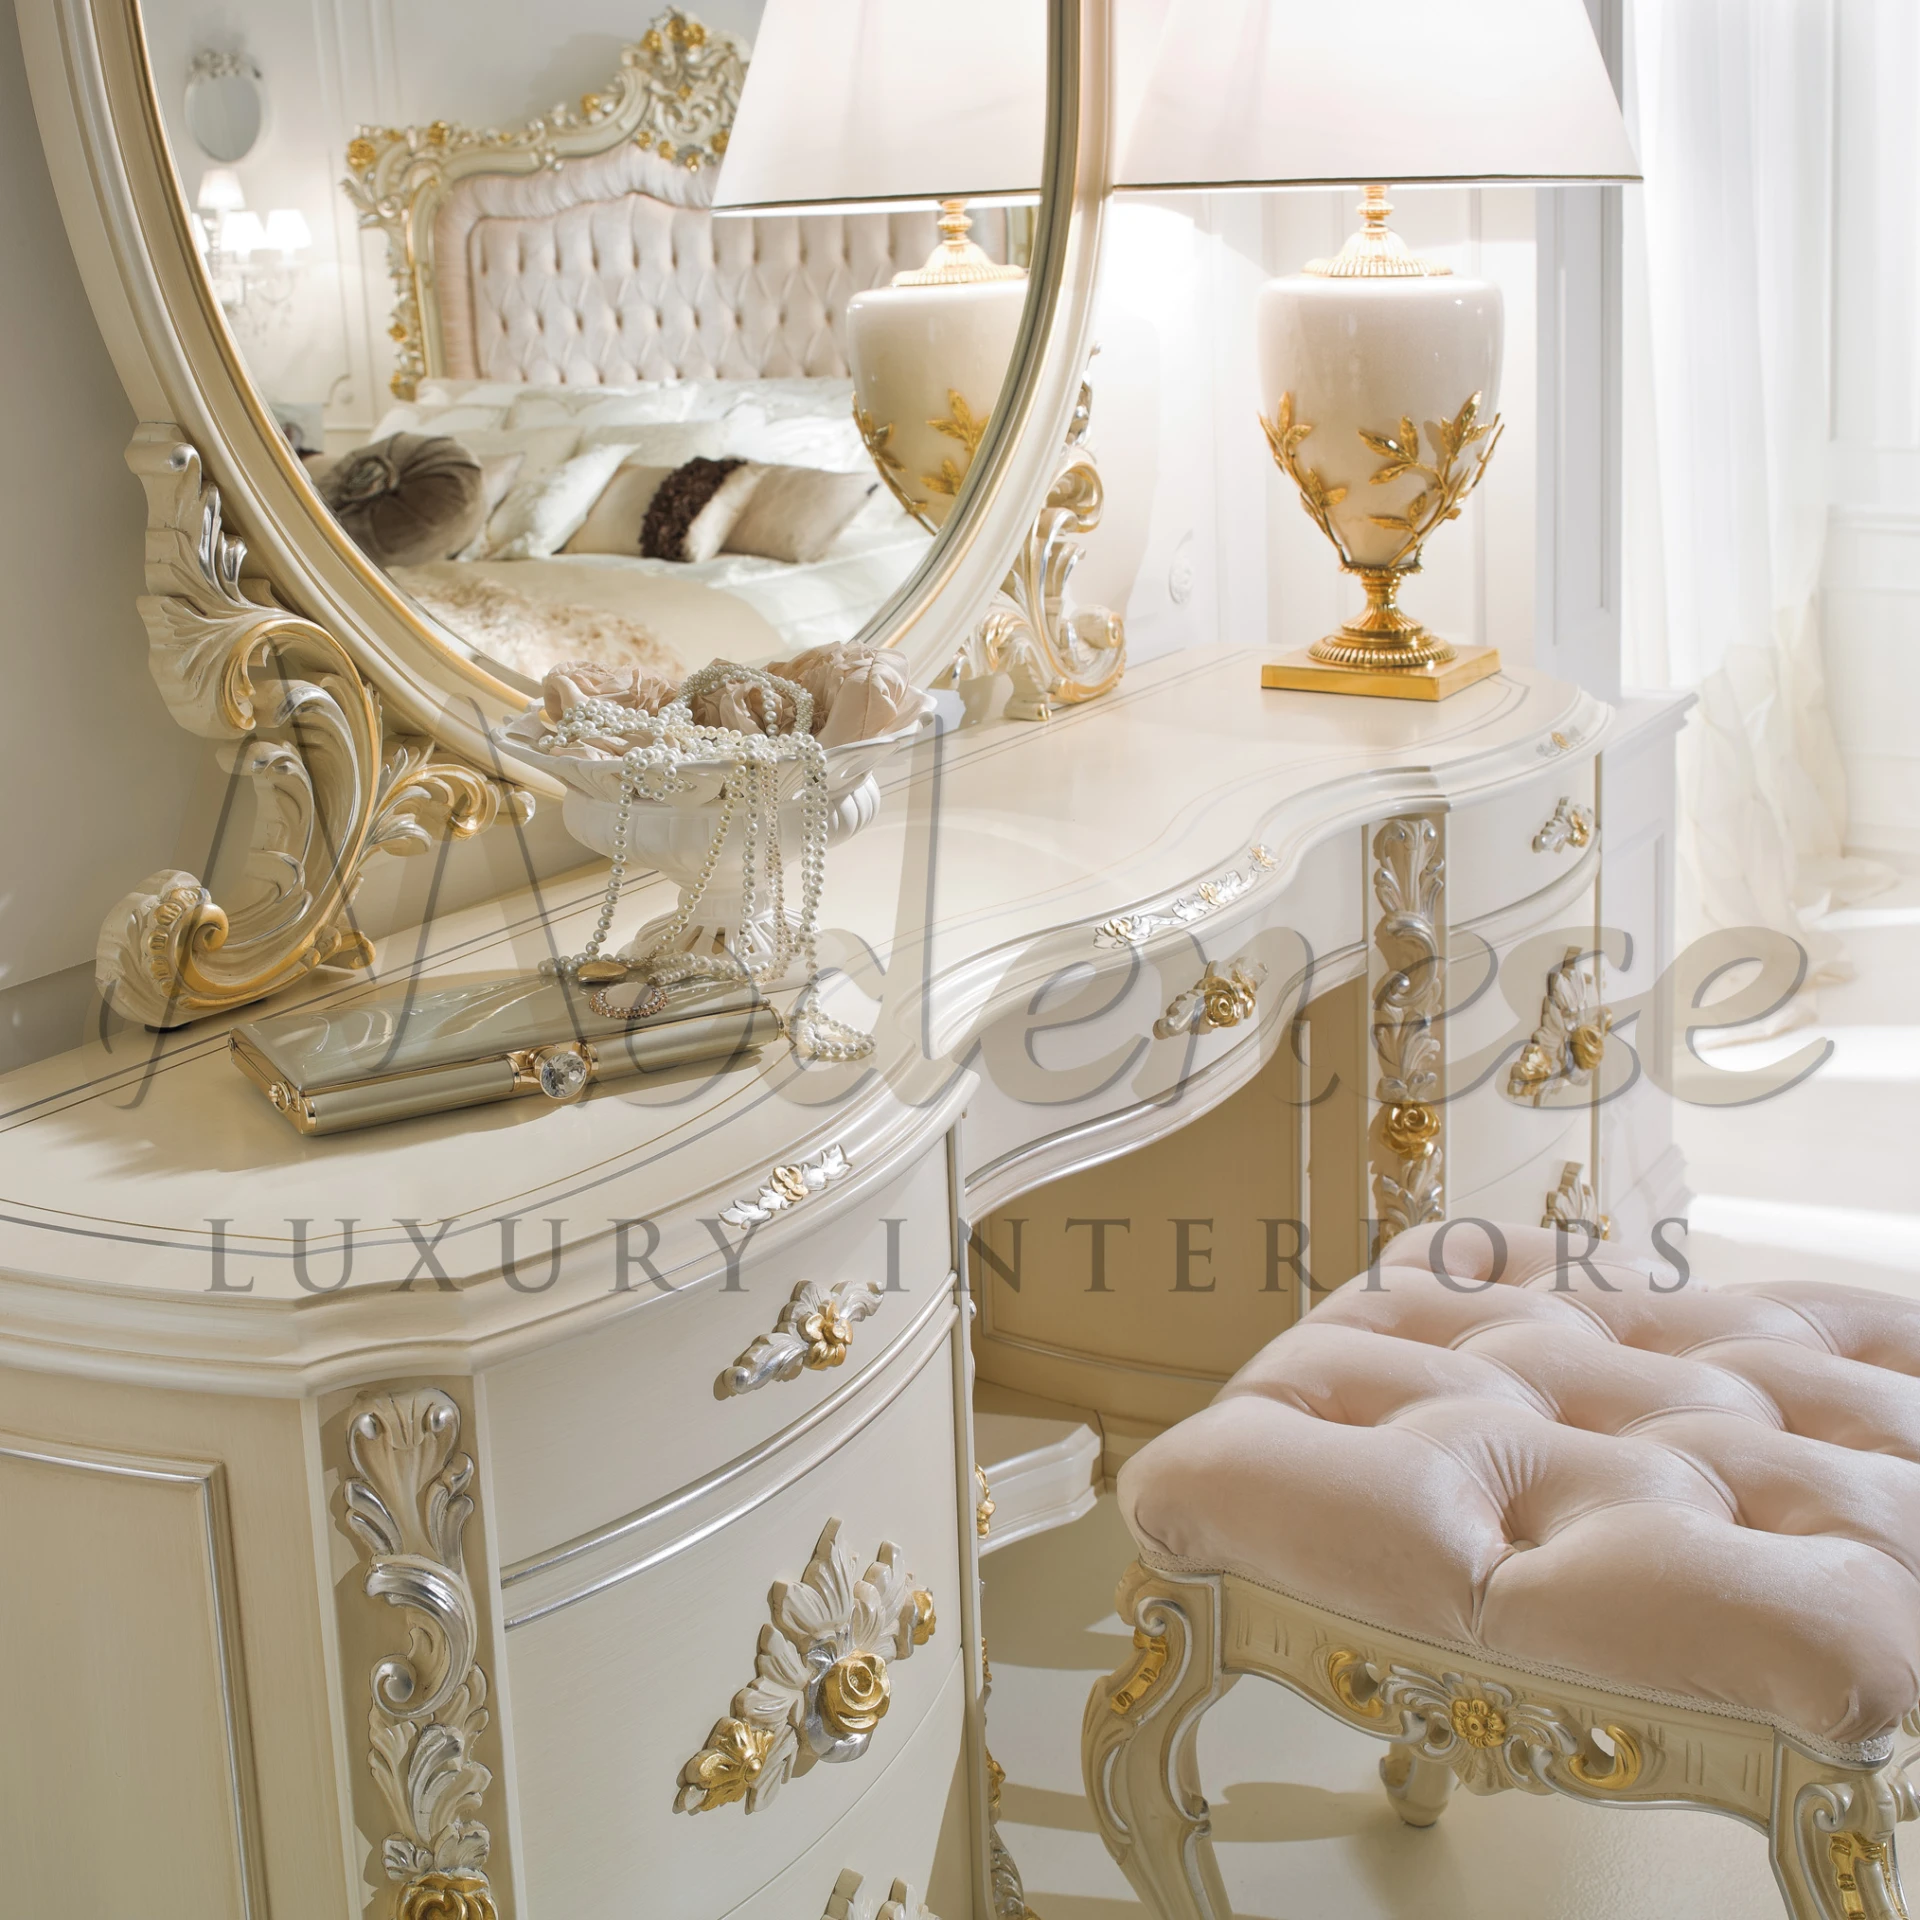 Experience opulence in every detail with our Elegant High-End Toilette, a masterpiece of sophistication and comfort.